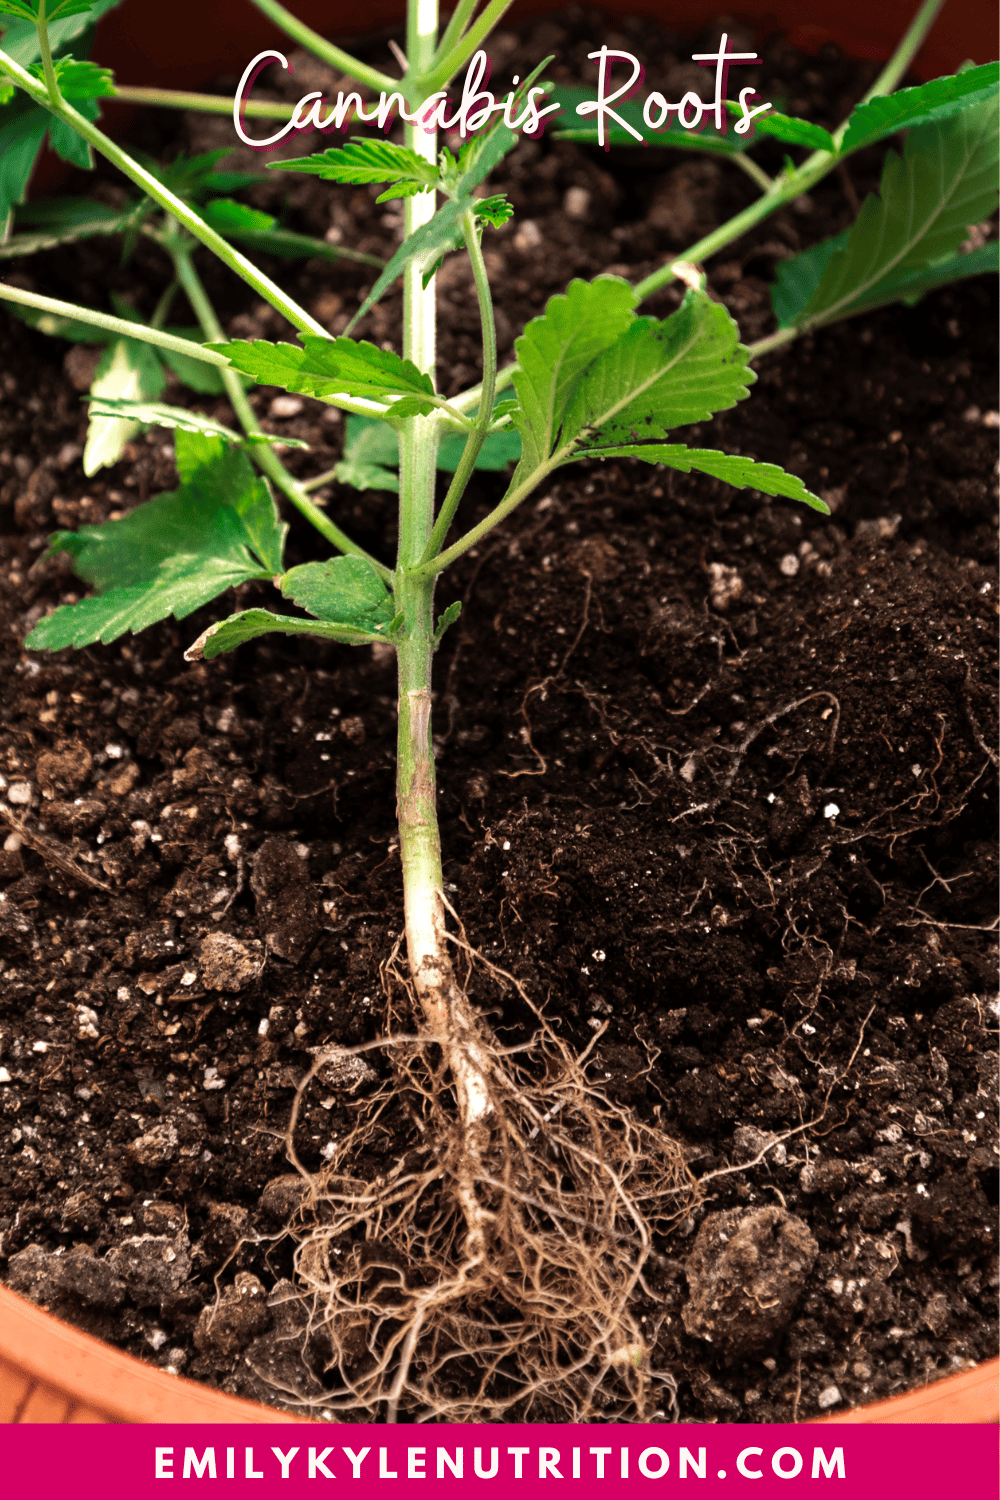 A picture of cannabis roots.